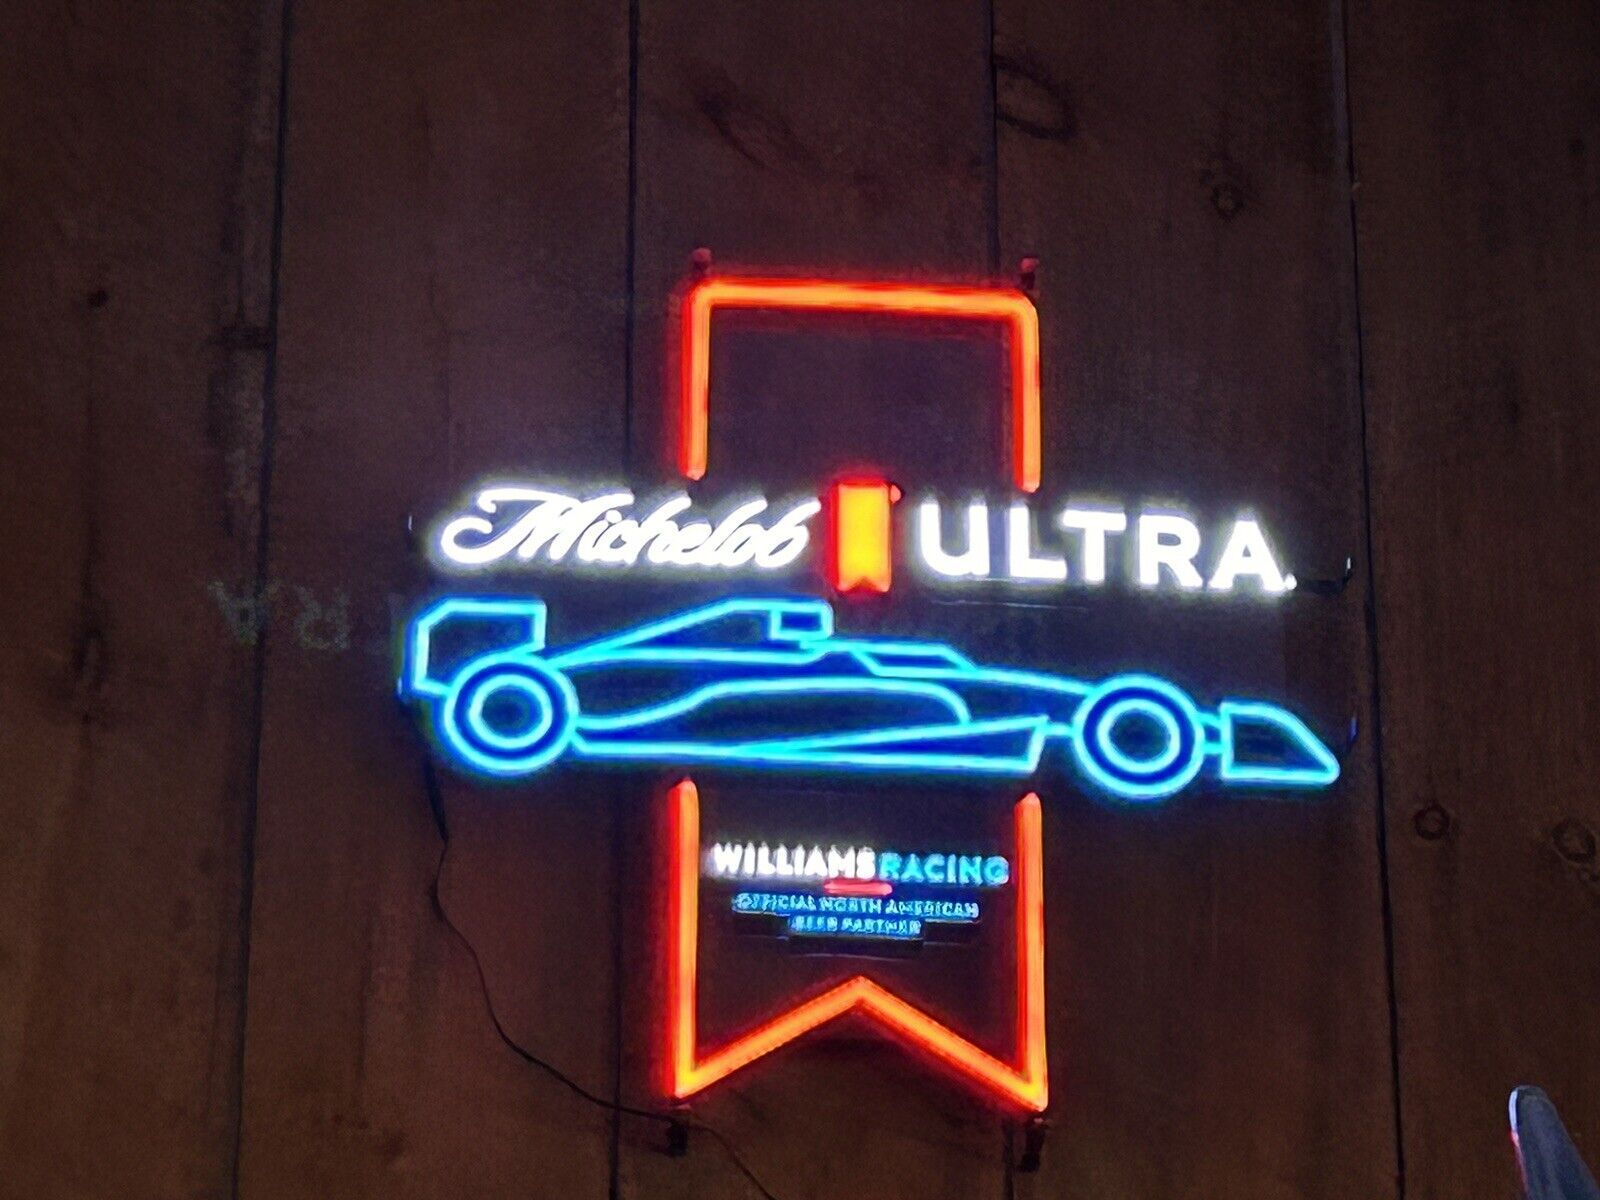 Michelob Ultra Beer Led Sign. Formula 1 Williams Racing Special Edition New